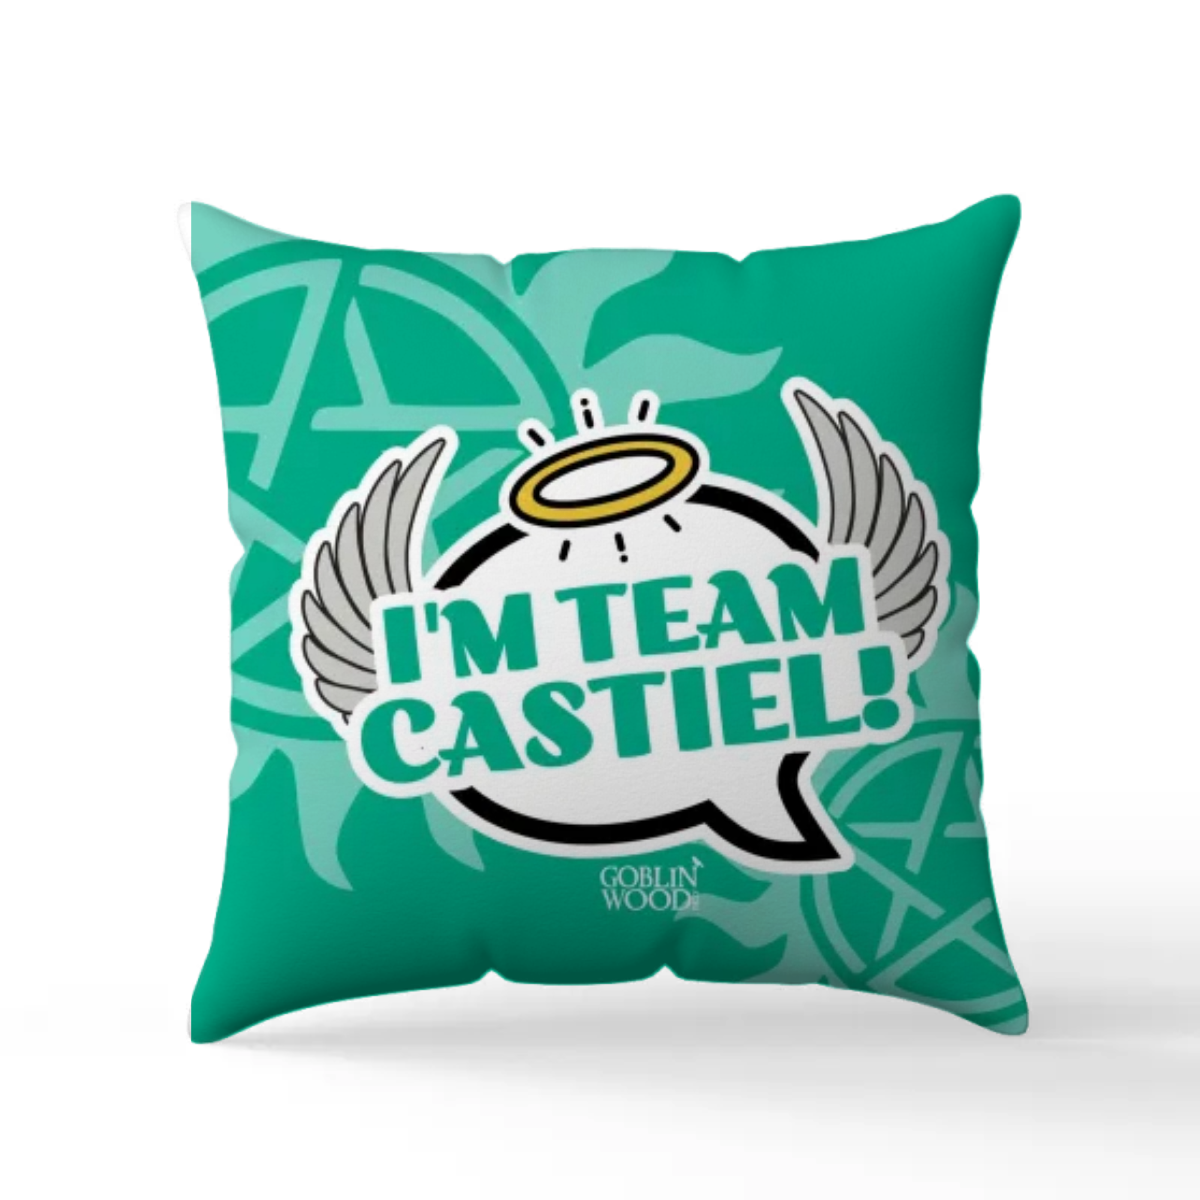 I'm Team Castiel! Speech Bubble Scatter Cushion - Supernatural Inspired - Goblin Wood Exclusive